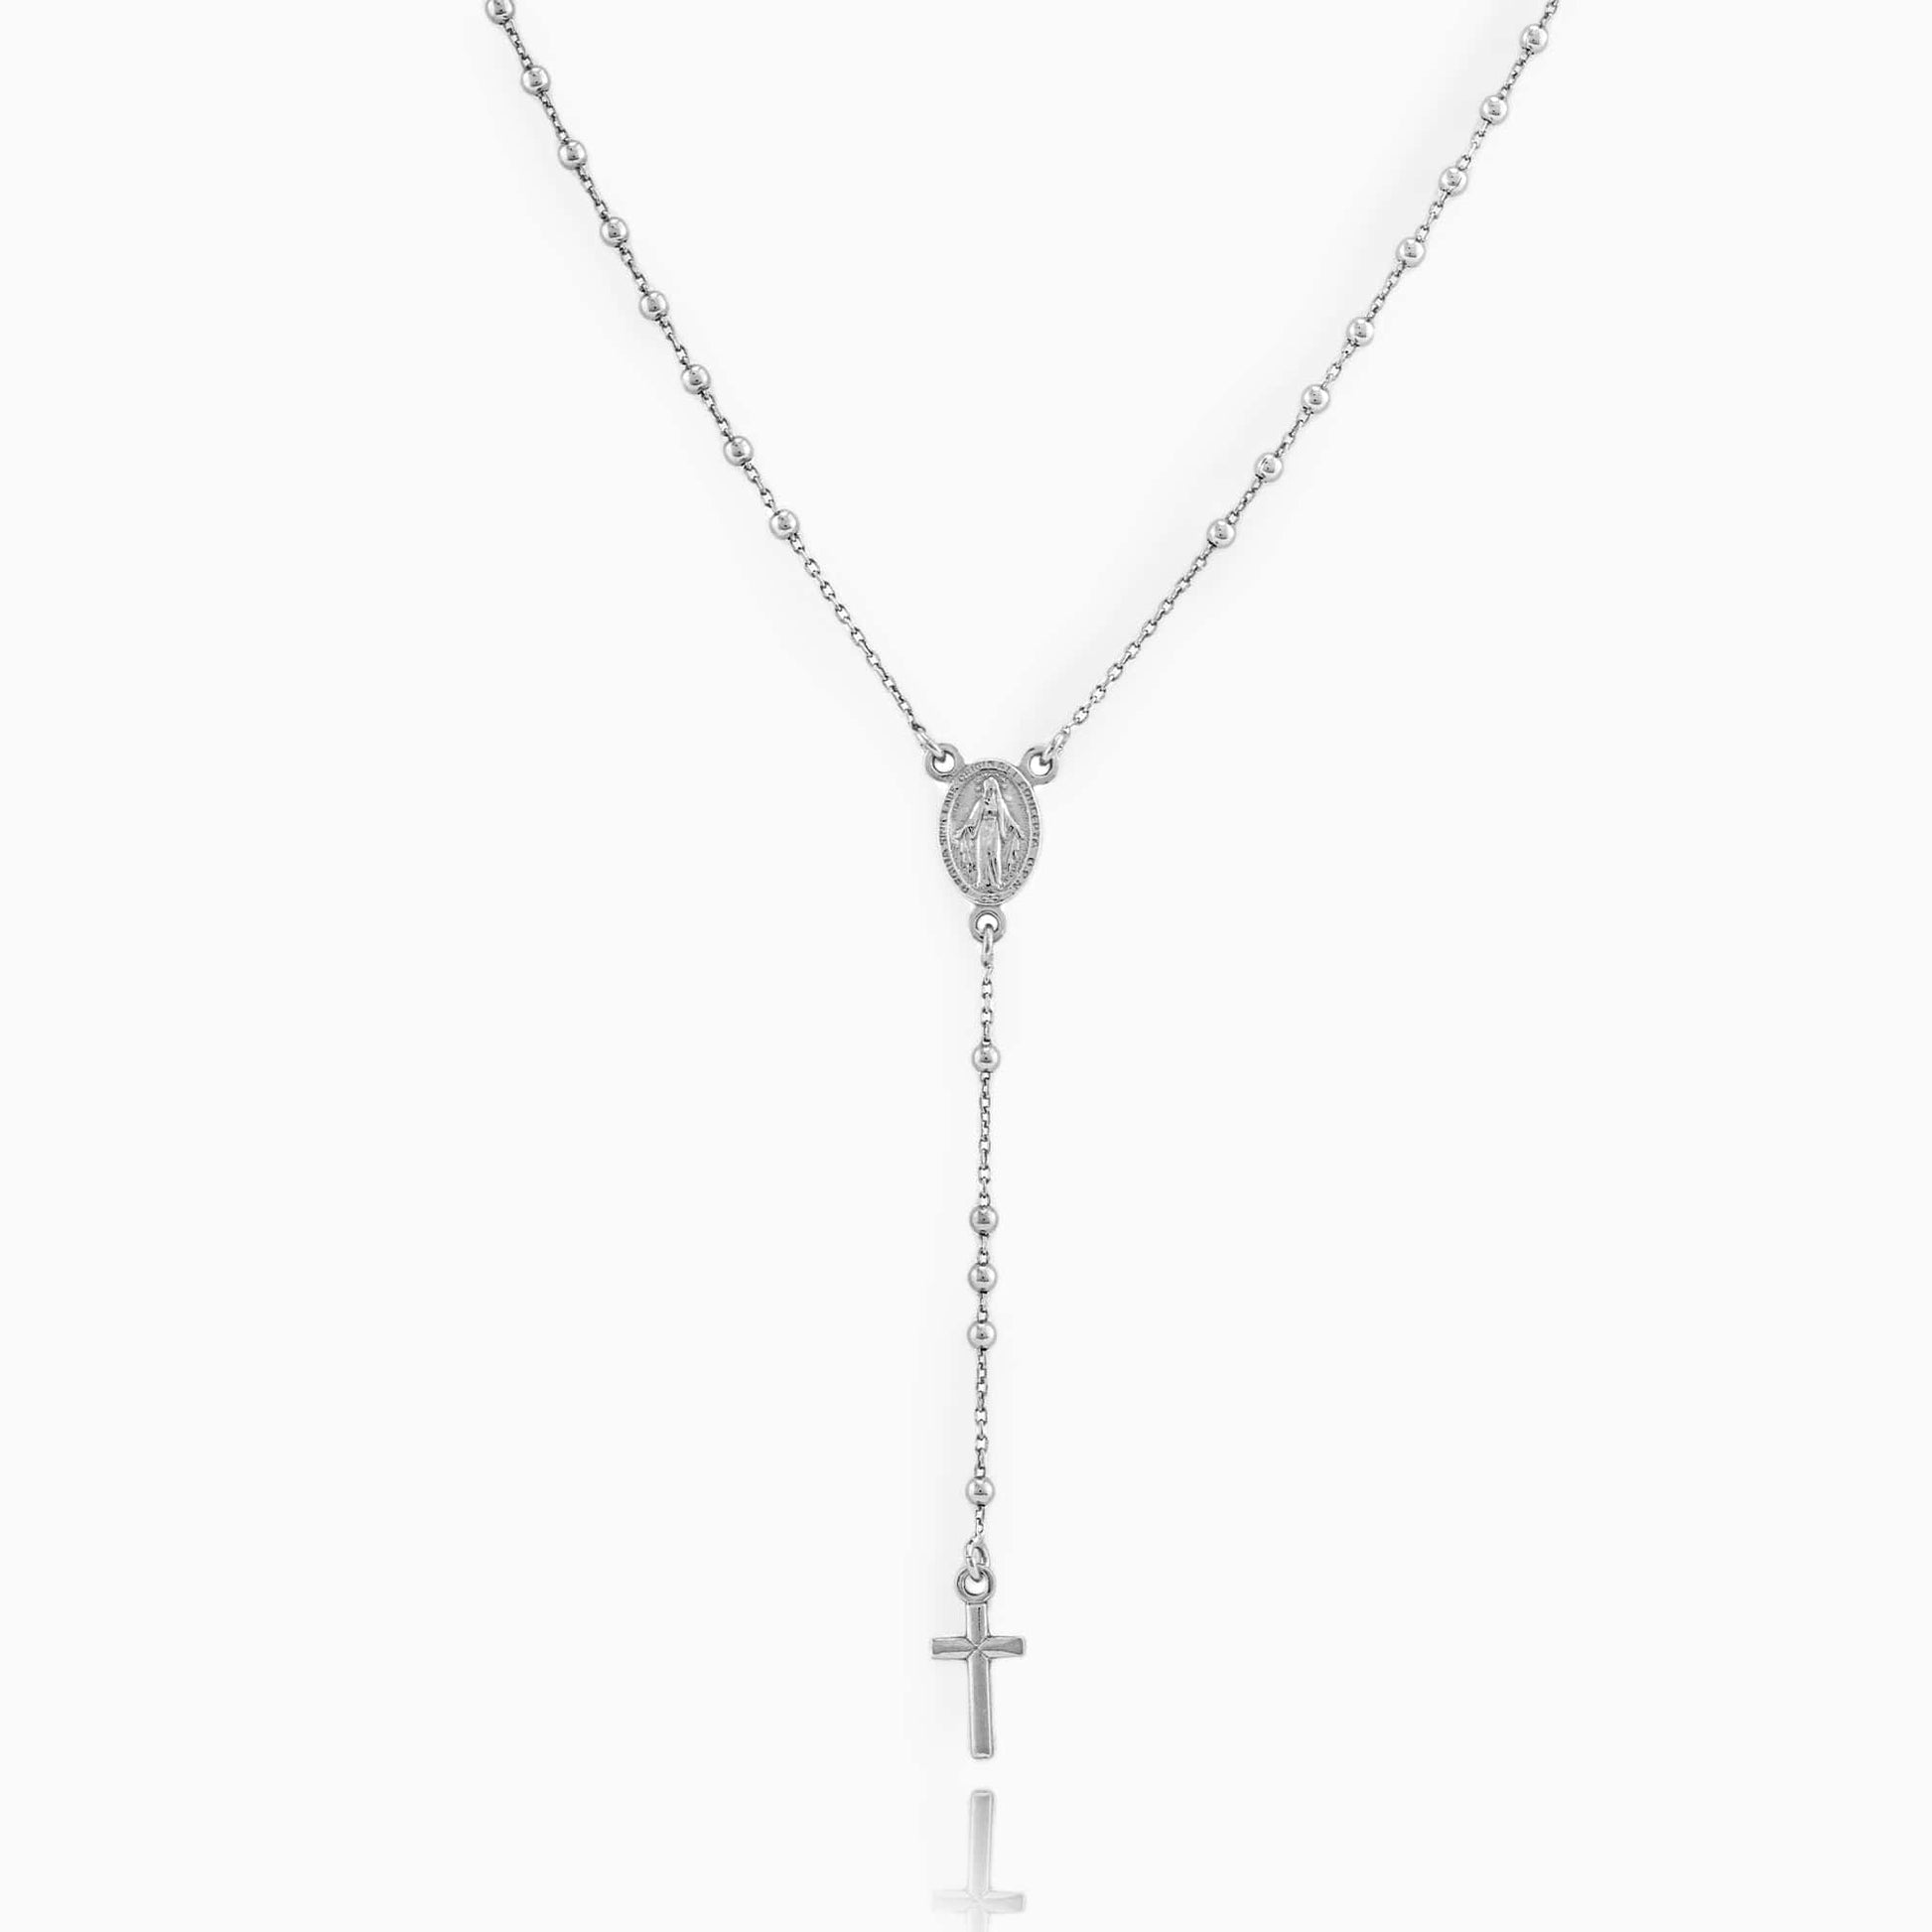 MONDO CATTOLICO Prayer Beads Rhodium / Cm 46 (18.1 in) MIRACULOUS MARY ROSARY 2 MM BEADS AND CROSS IN STERLING SILVER